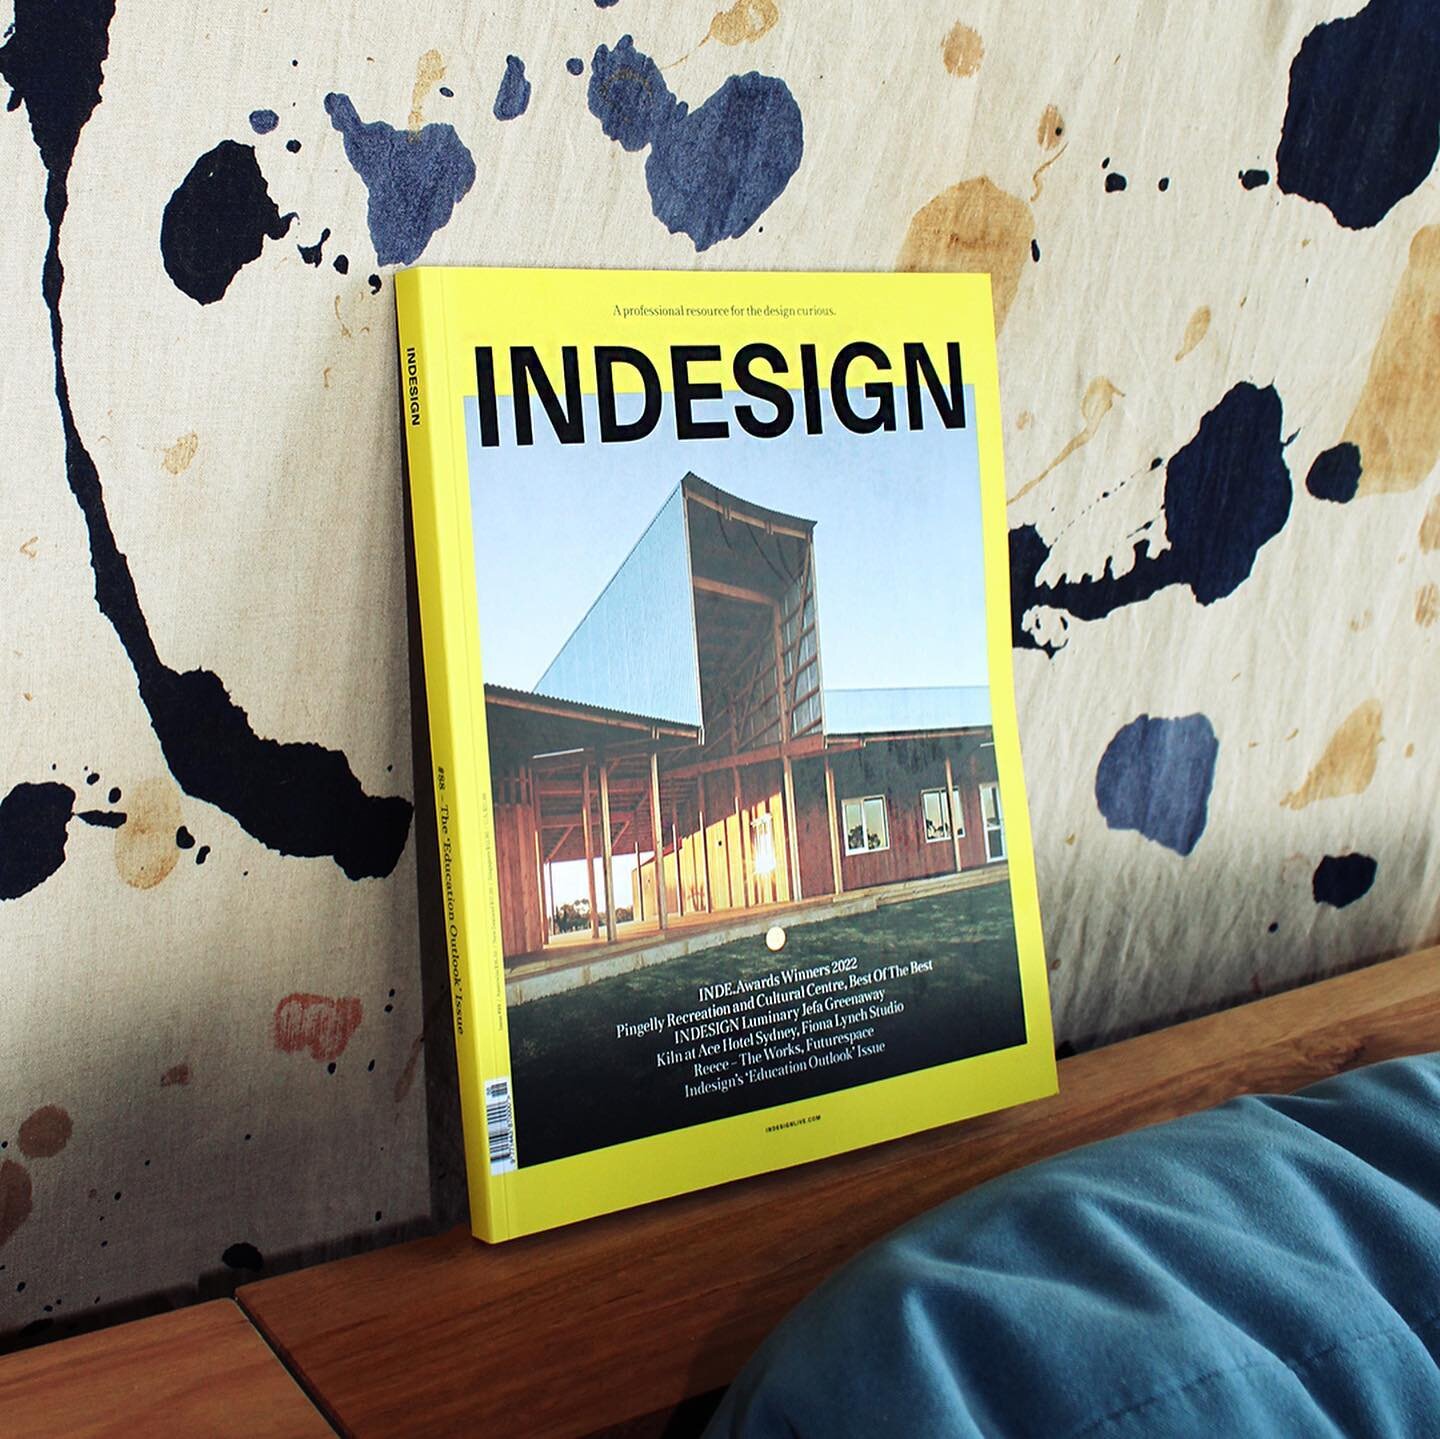 Honoured to have the MLC Nicholas Learning Centre featured in the Education Outlook edition of InDesign Magazine.

Collaborating with Australian furniture manufacturer @howgroup, we were able to create an environment that puts students at the heart o